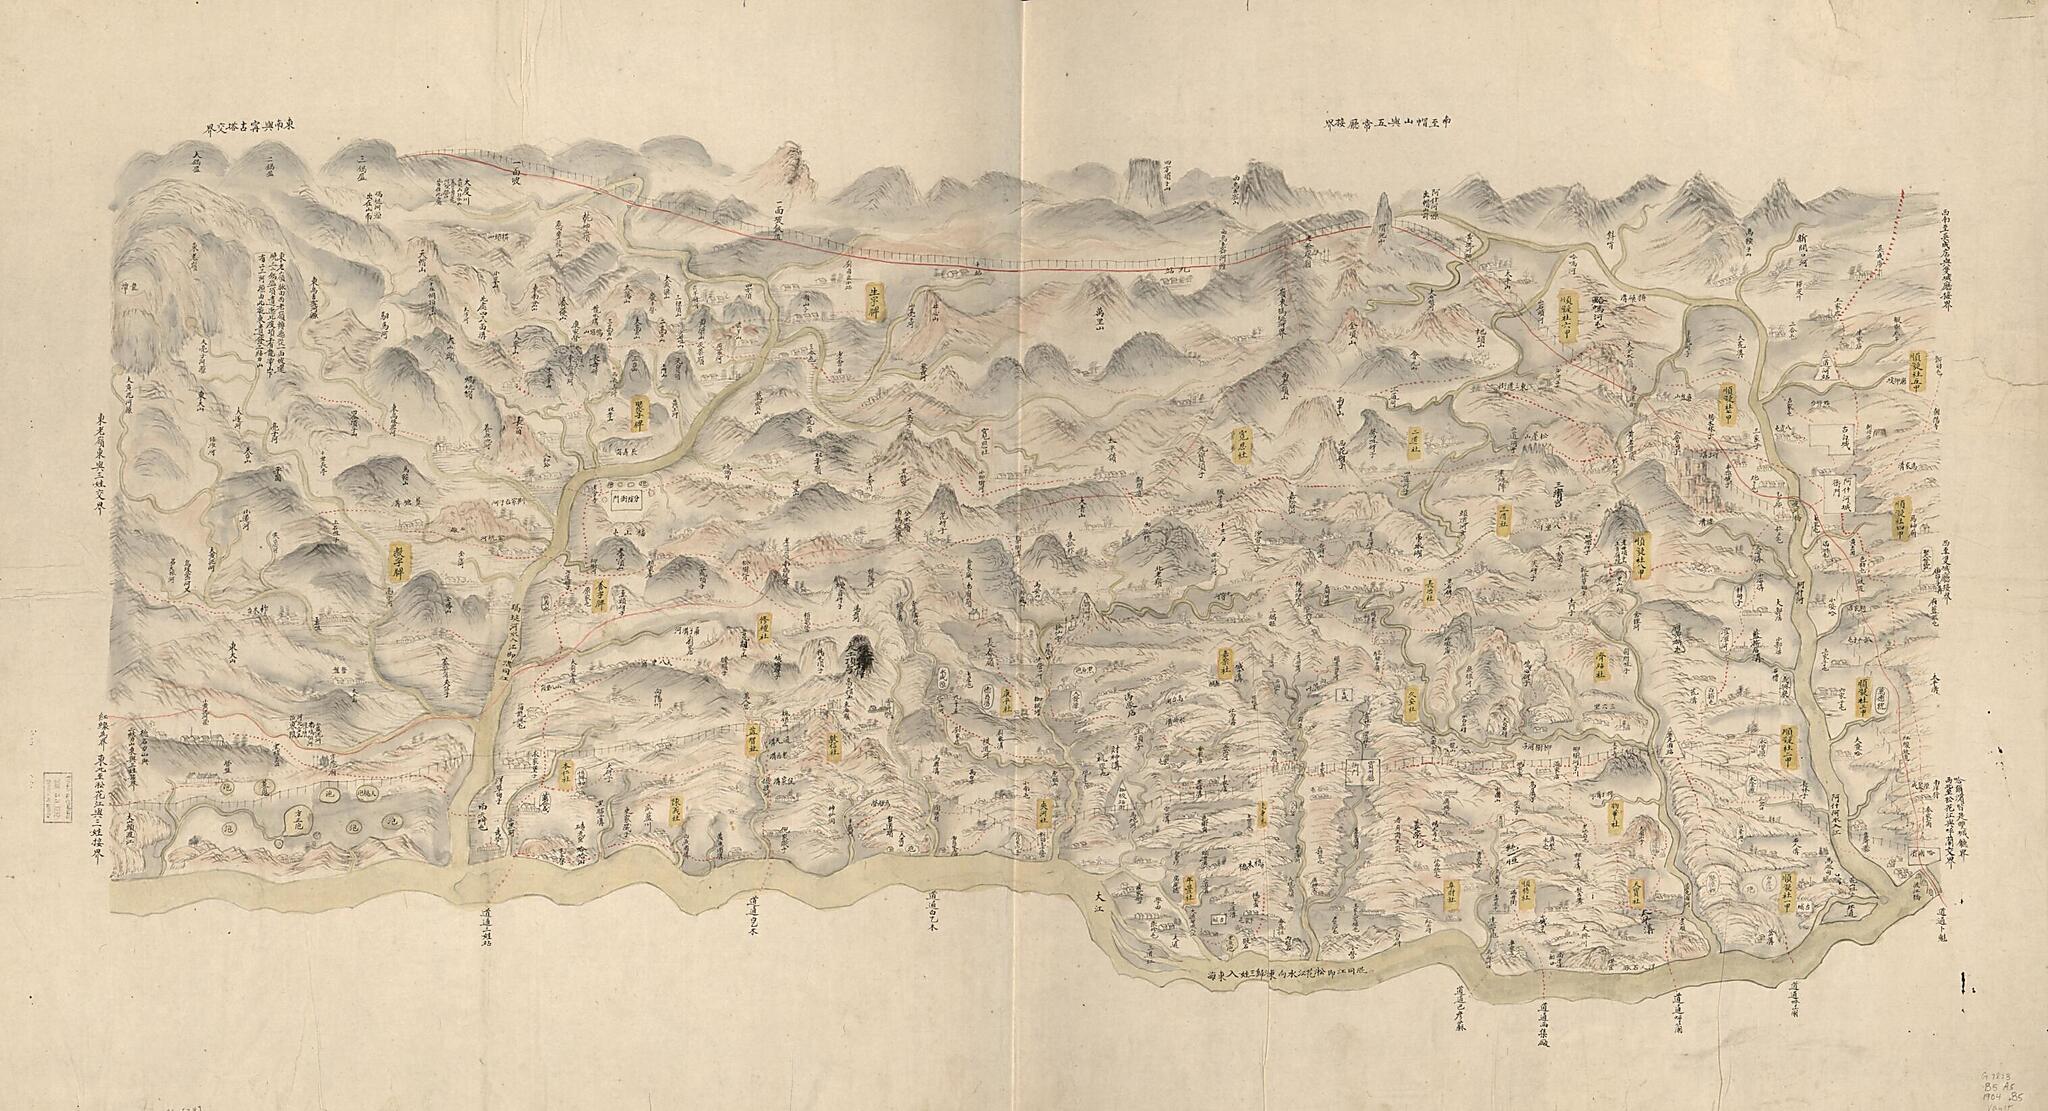 This old map of Binzhou Ting Xiang She Quan Tu (賓州廳鄉社全圖, Complete Commune Map of Binzhou Prefecture) from 1902 was created by Arthur W. (Arthur William) Hummel in 1902